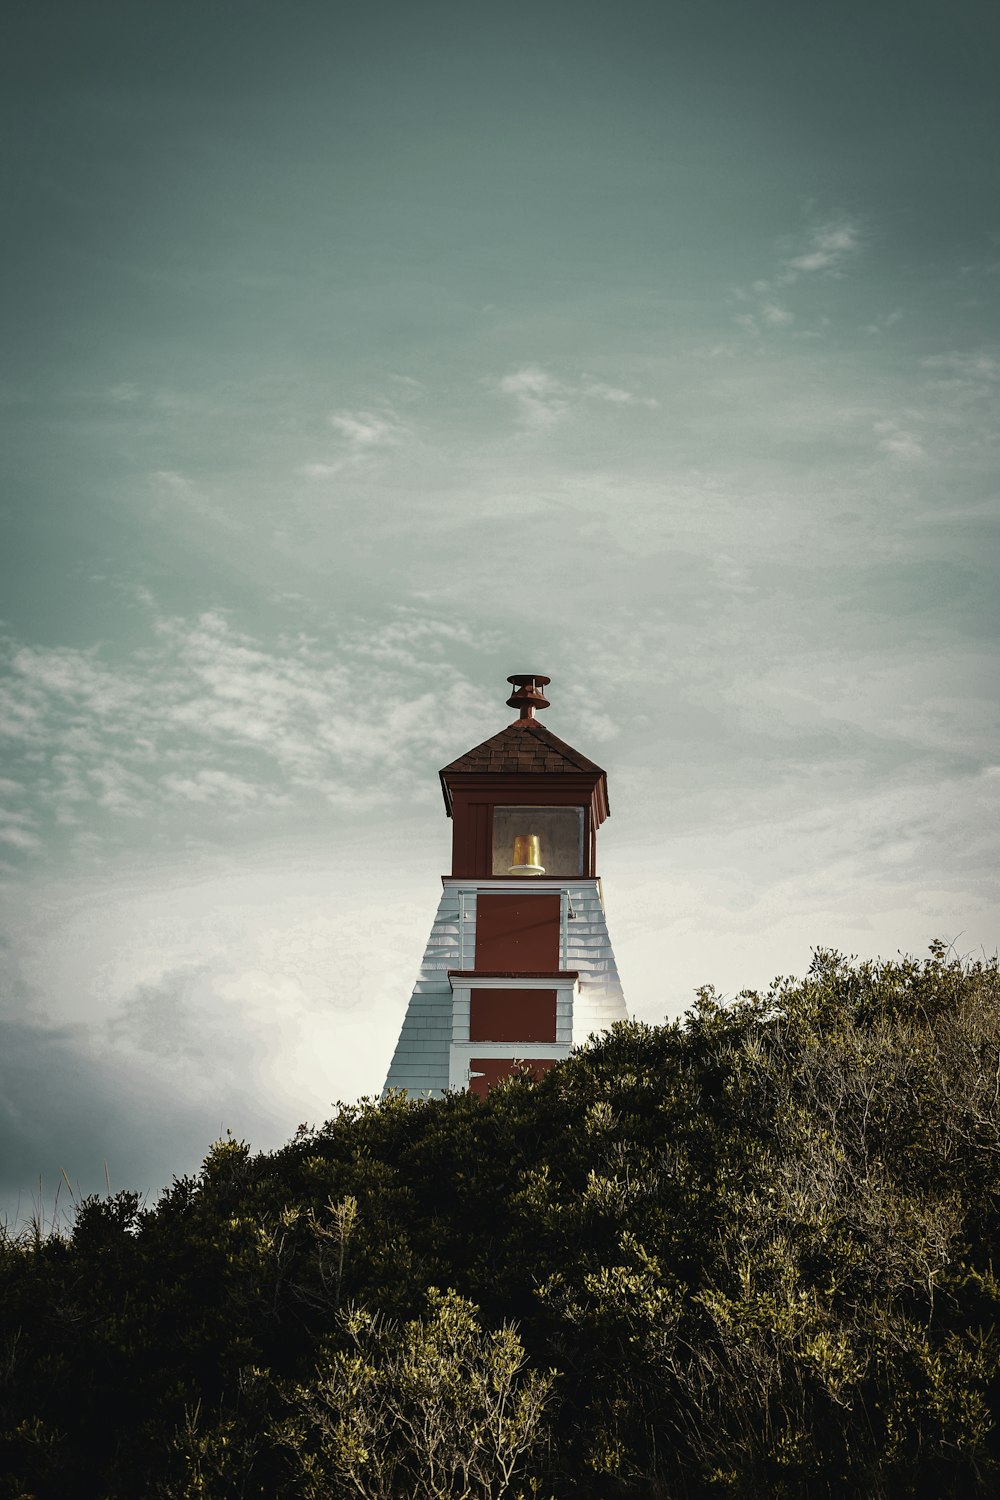 a red and white lighthouse on top of a hill